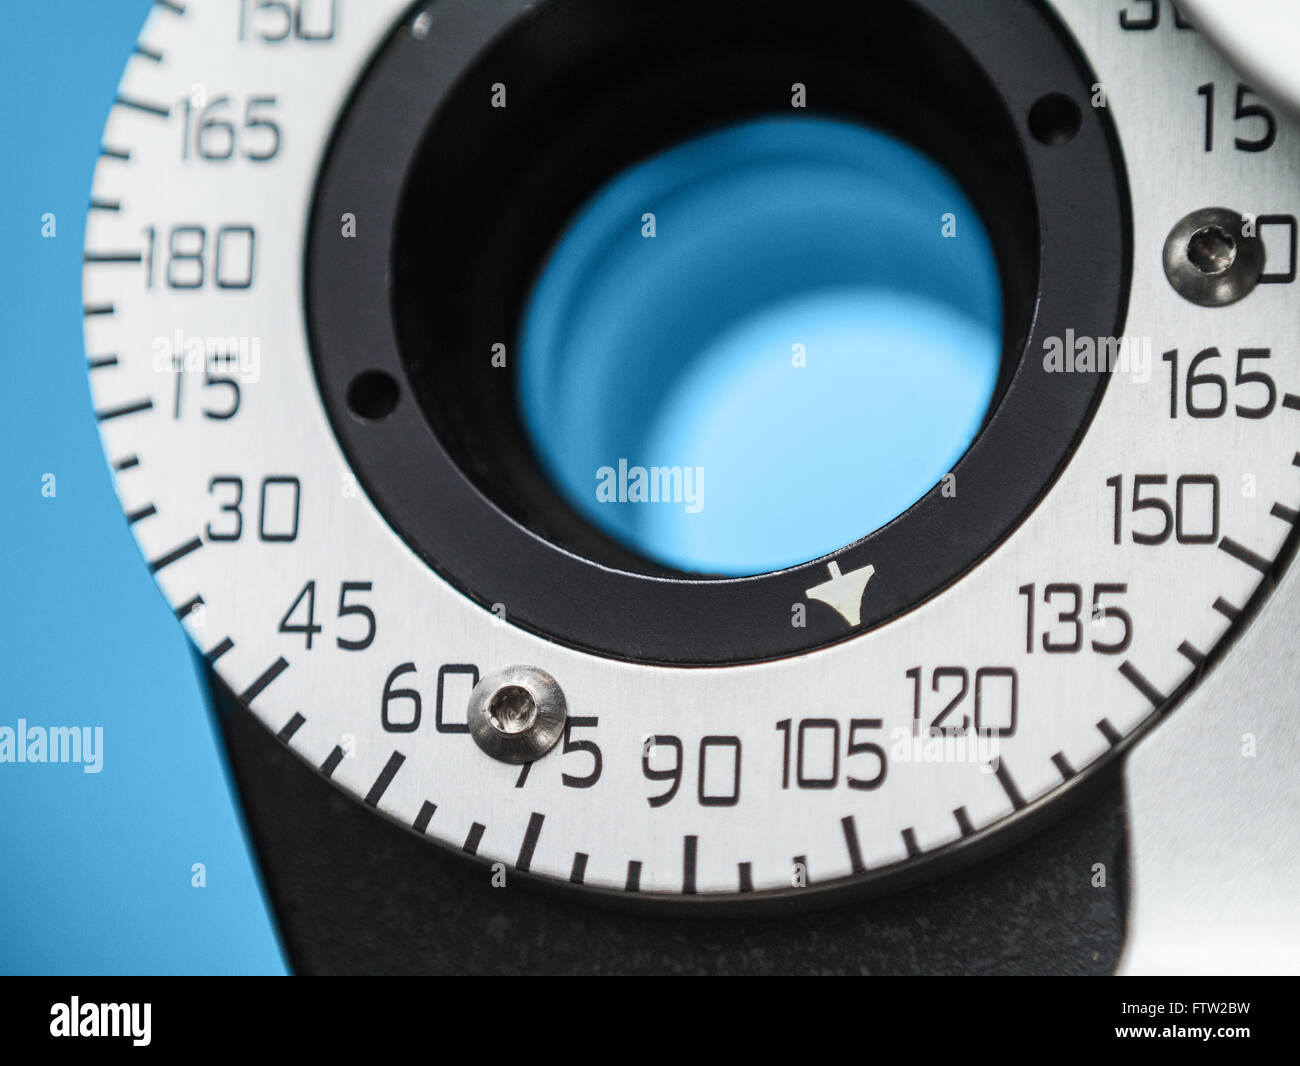 Photograph of a dial on a phoropter in an eye doctor's office. The dial is seen in close up with shallow depth of focus. Stock Photo